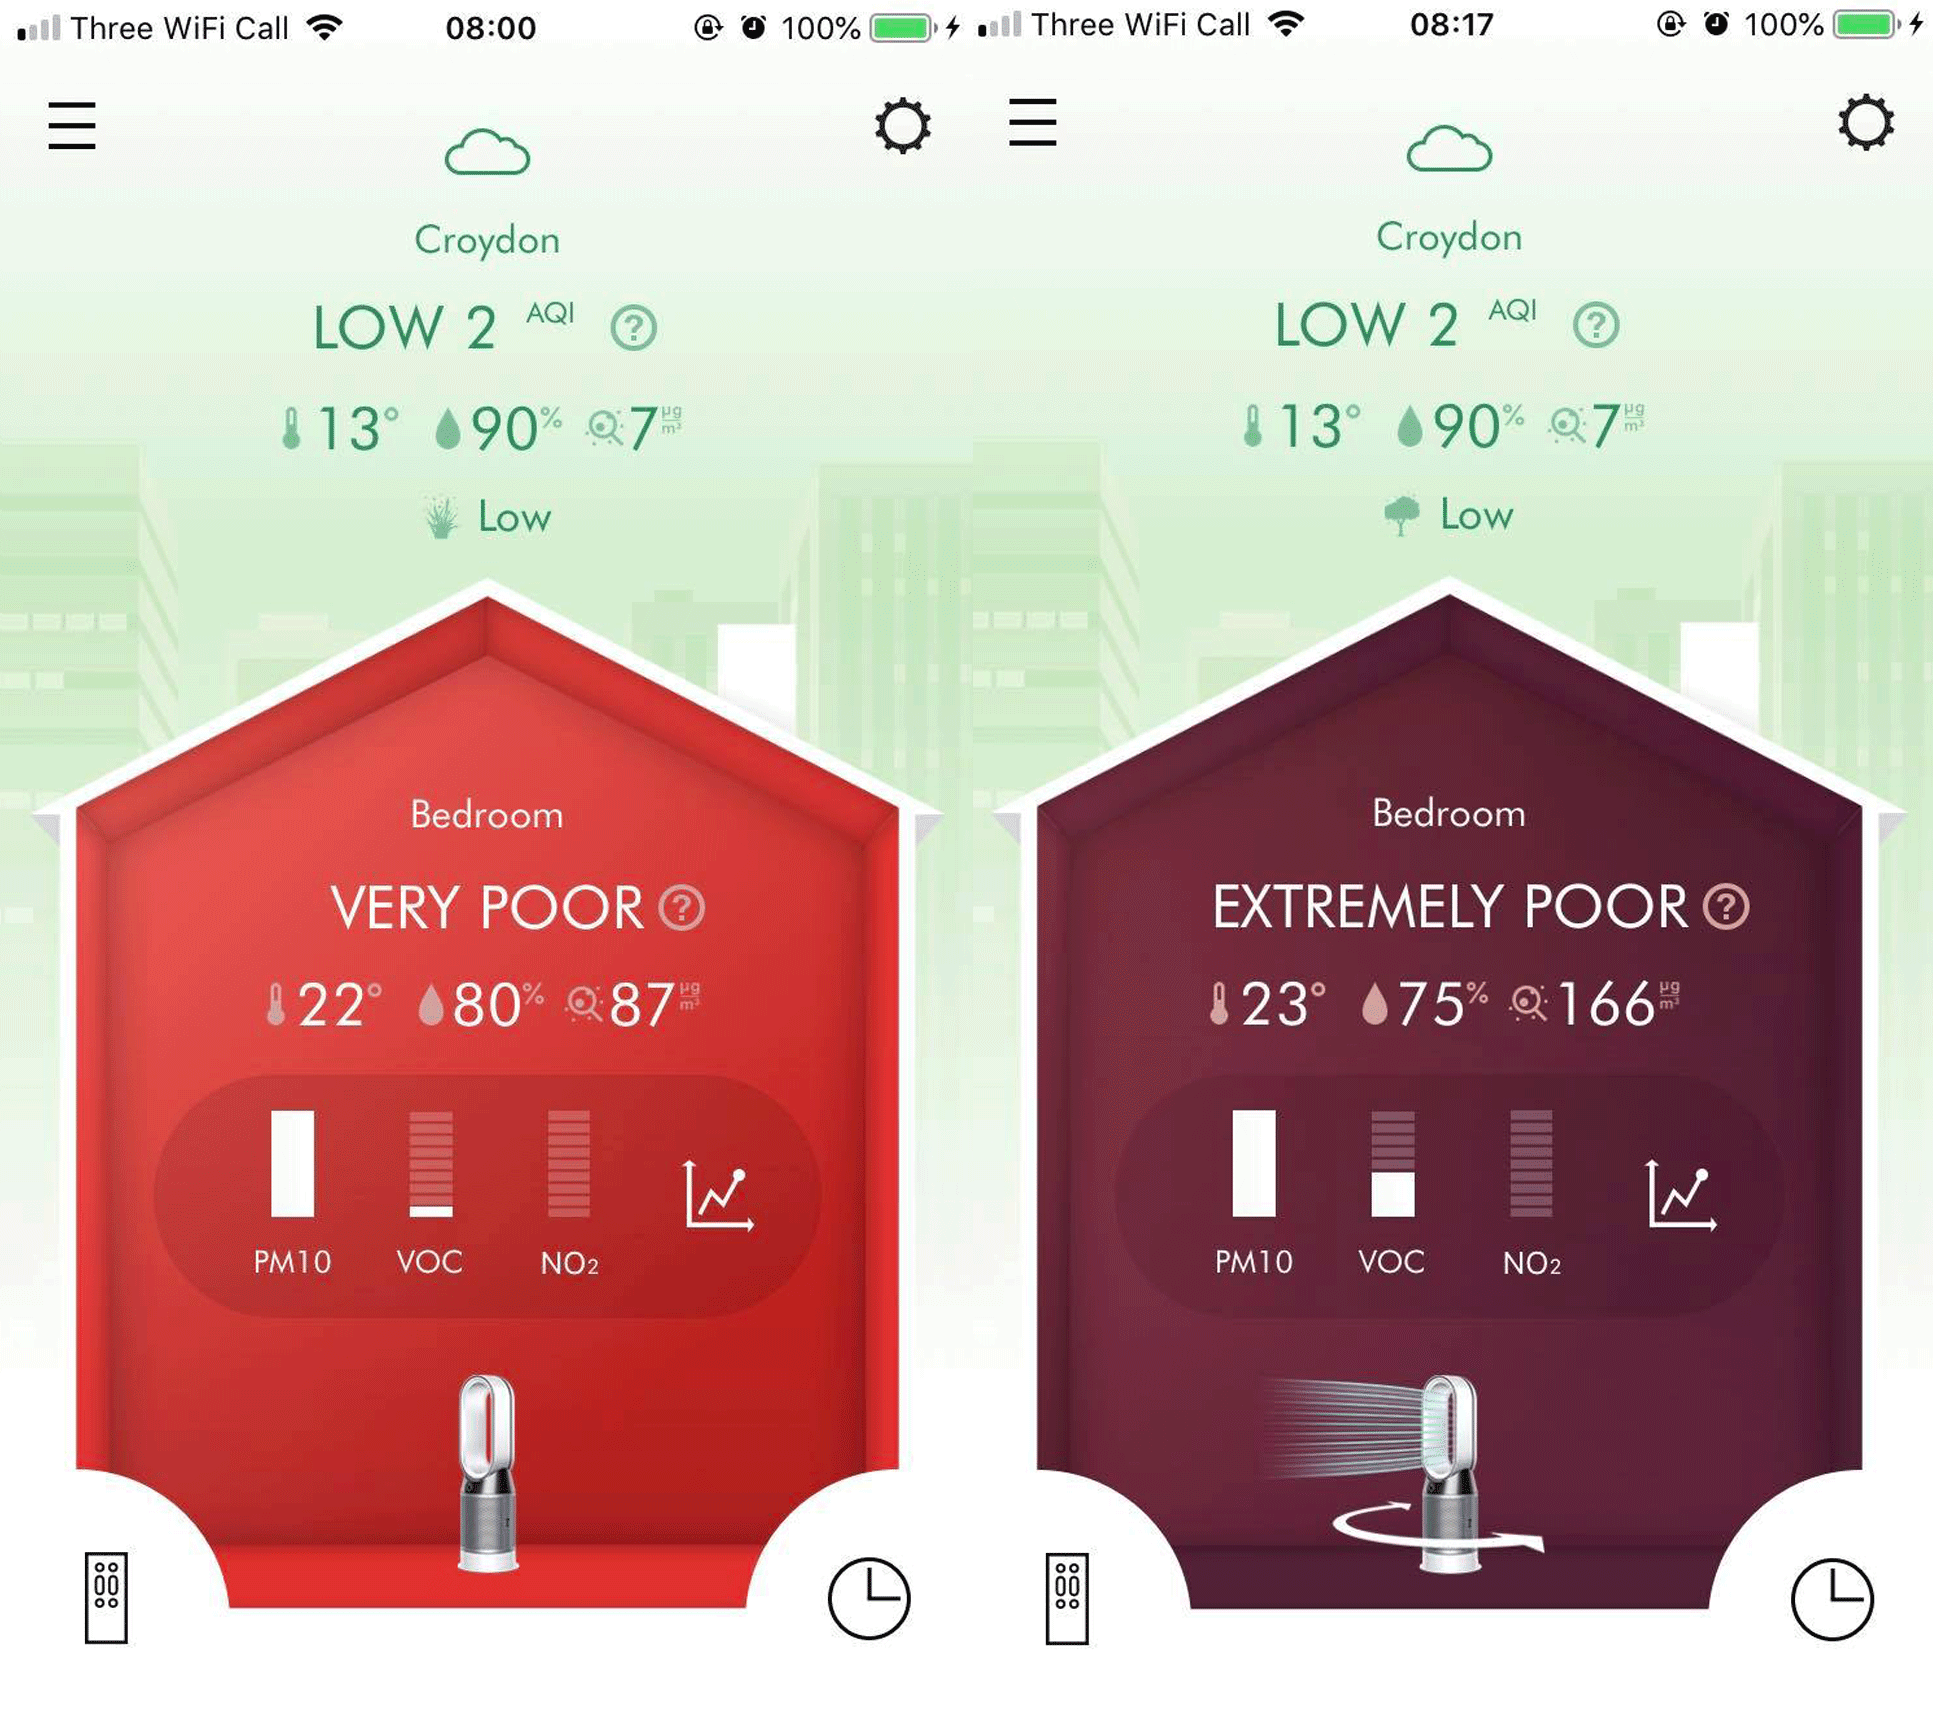 Dyson fan app statistics for purifying on a smart phone